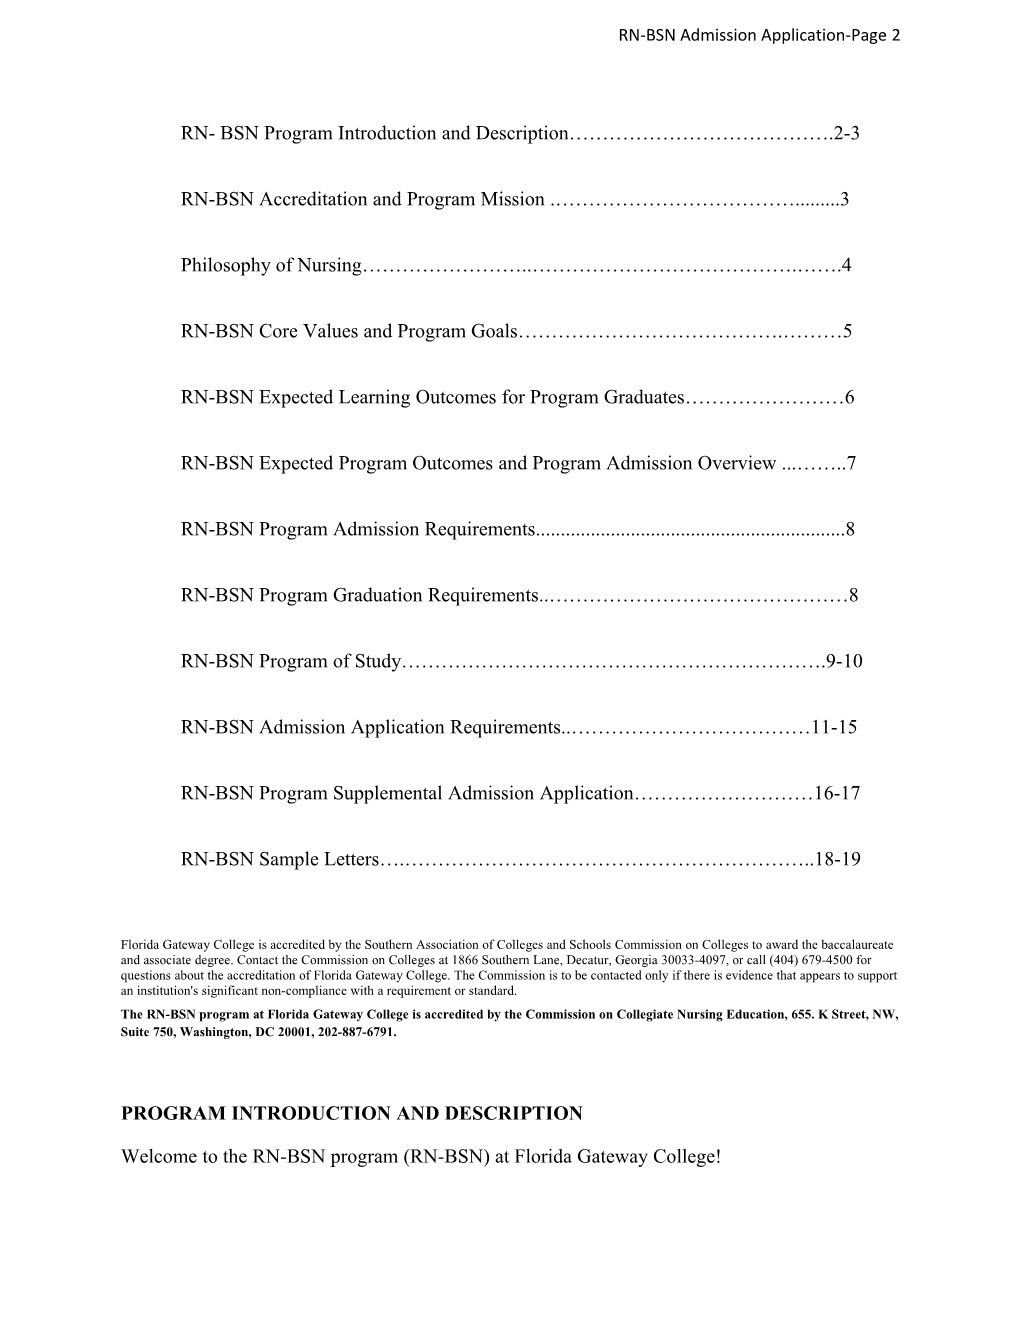 RN-BSN Admission Application-Page 1